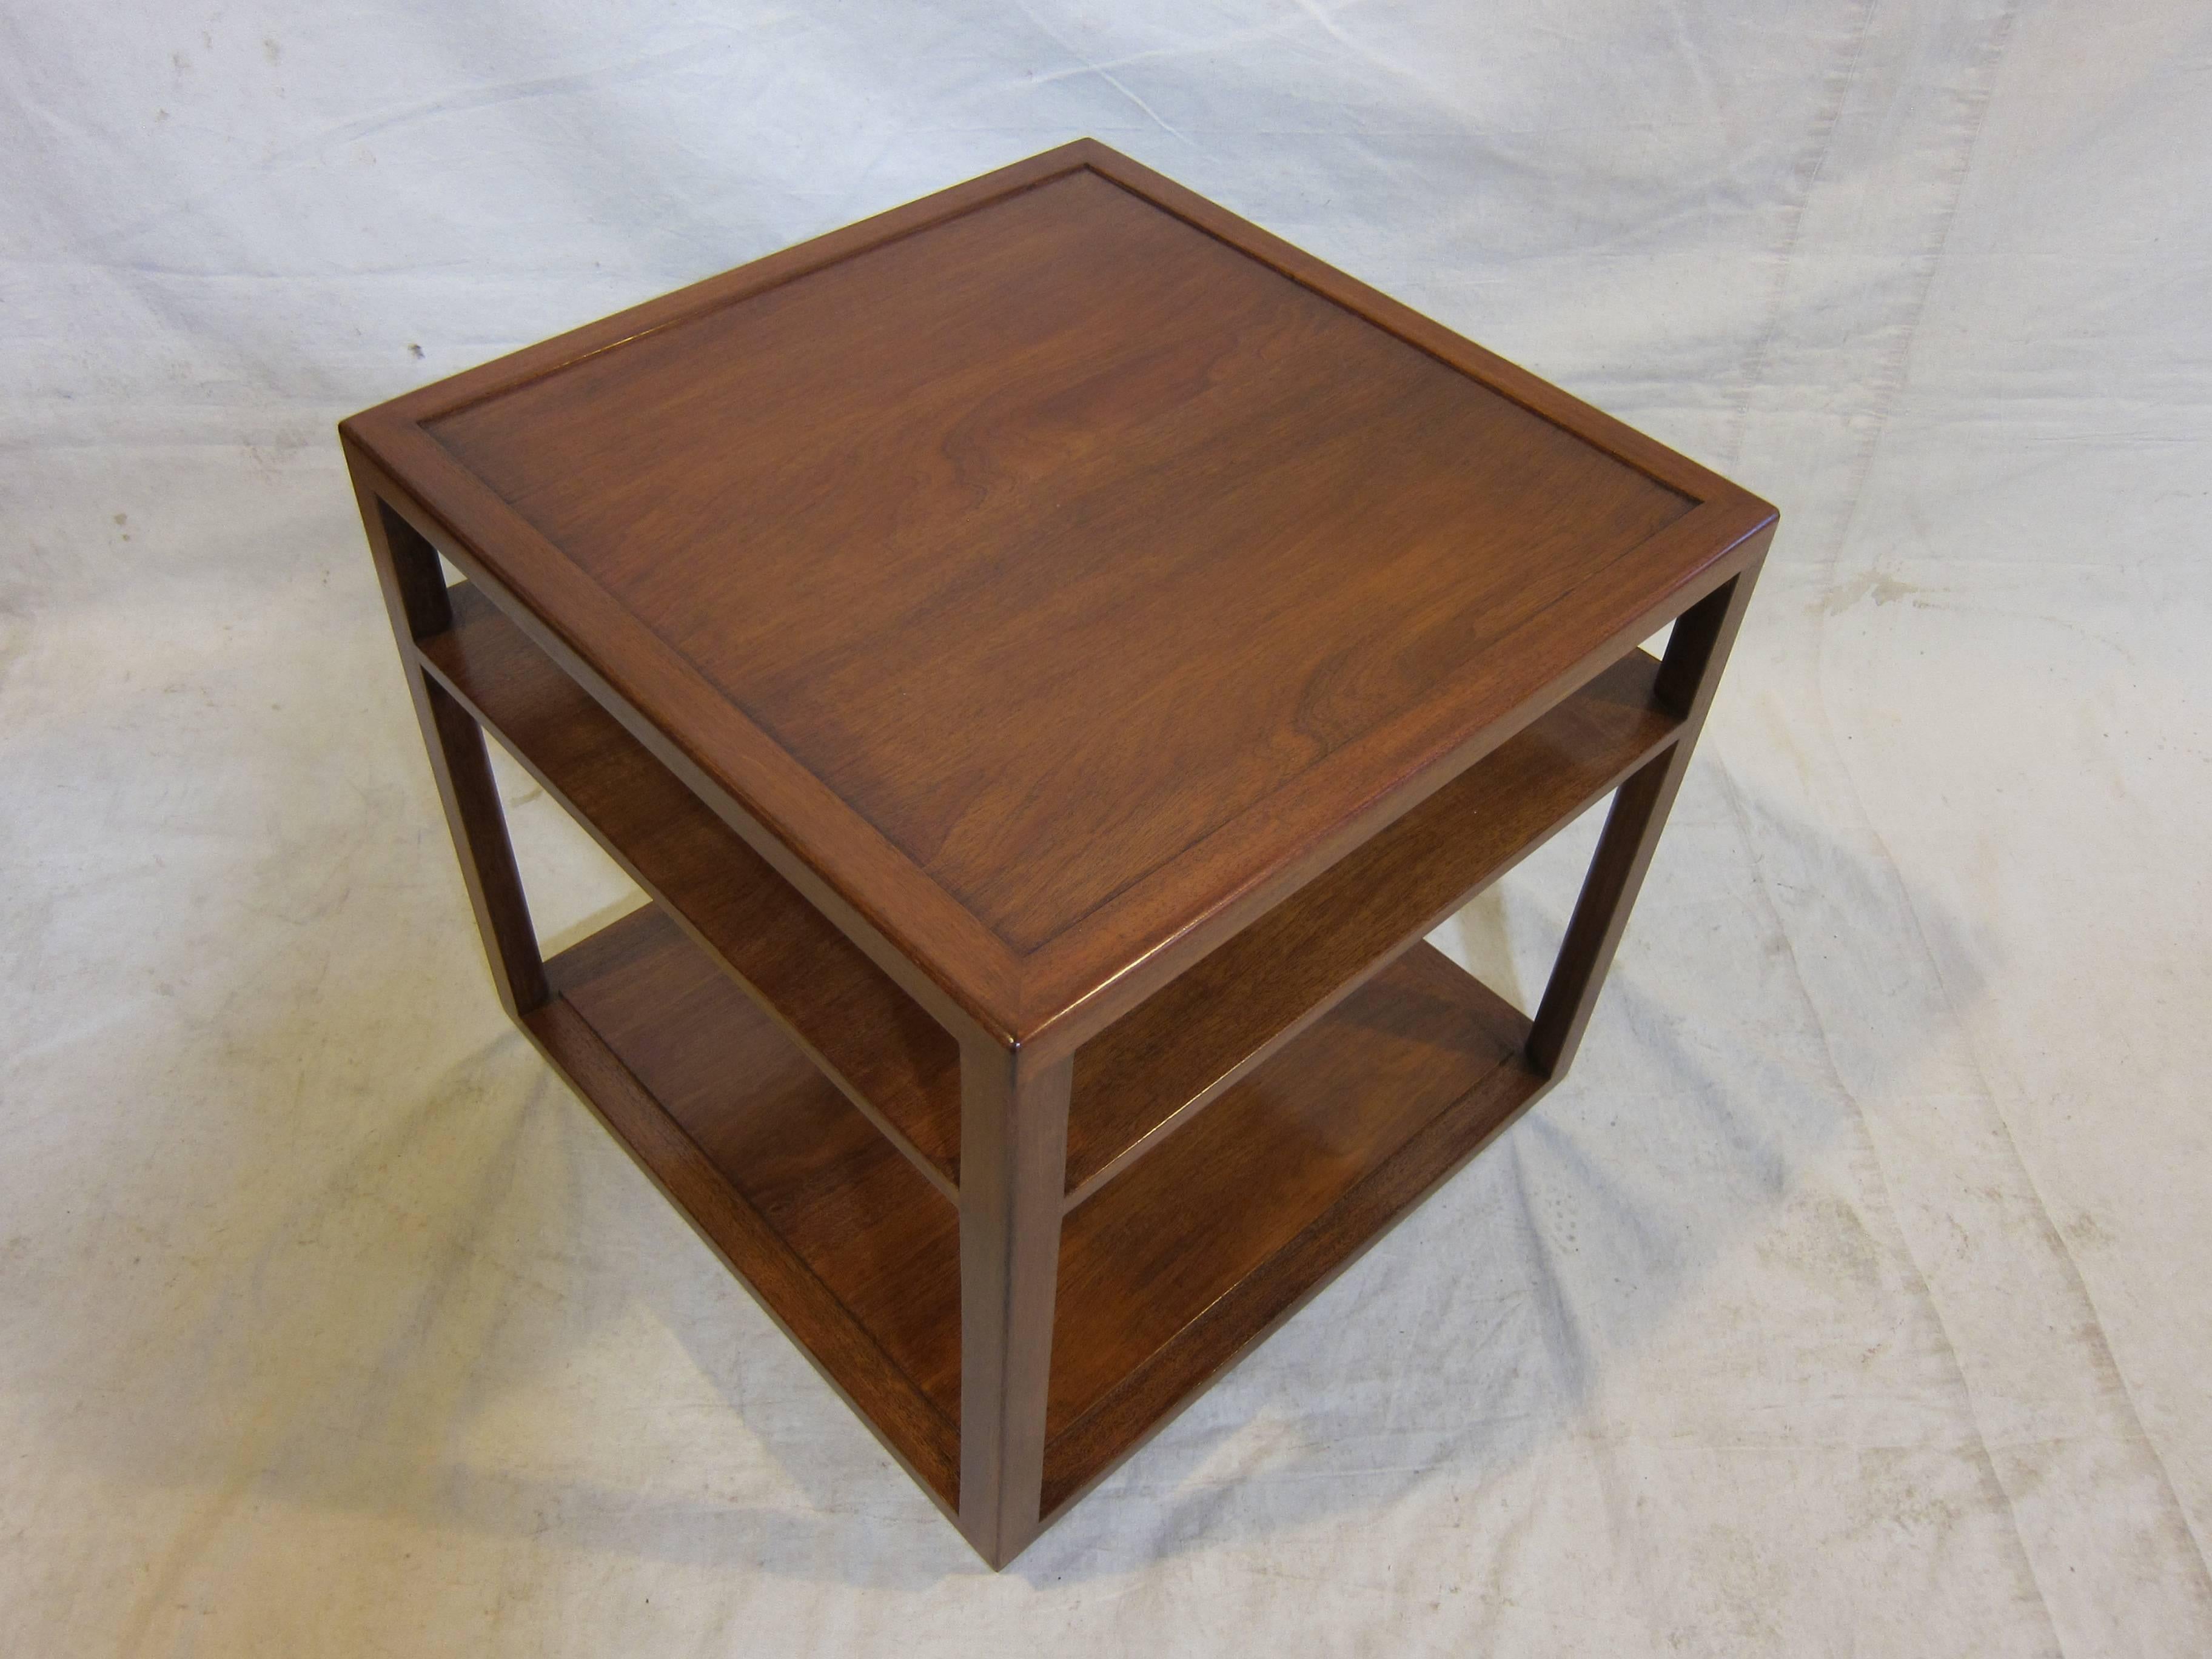 Edward Wormley "Dunbar For Modern"  mahogany side table.  Excellent condition with brass tag to underside.  This table is an early entry to Edward Wormley's designs of Modern style and his start with Dunbar Furniture co., beginning in 1947